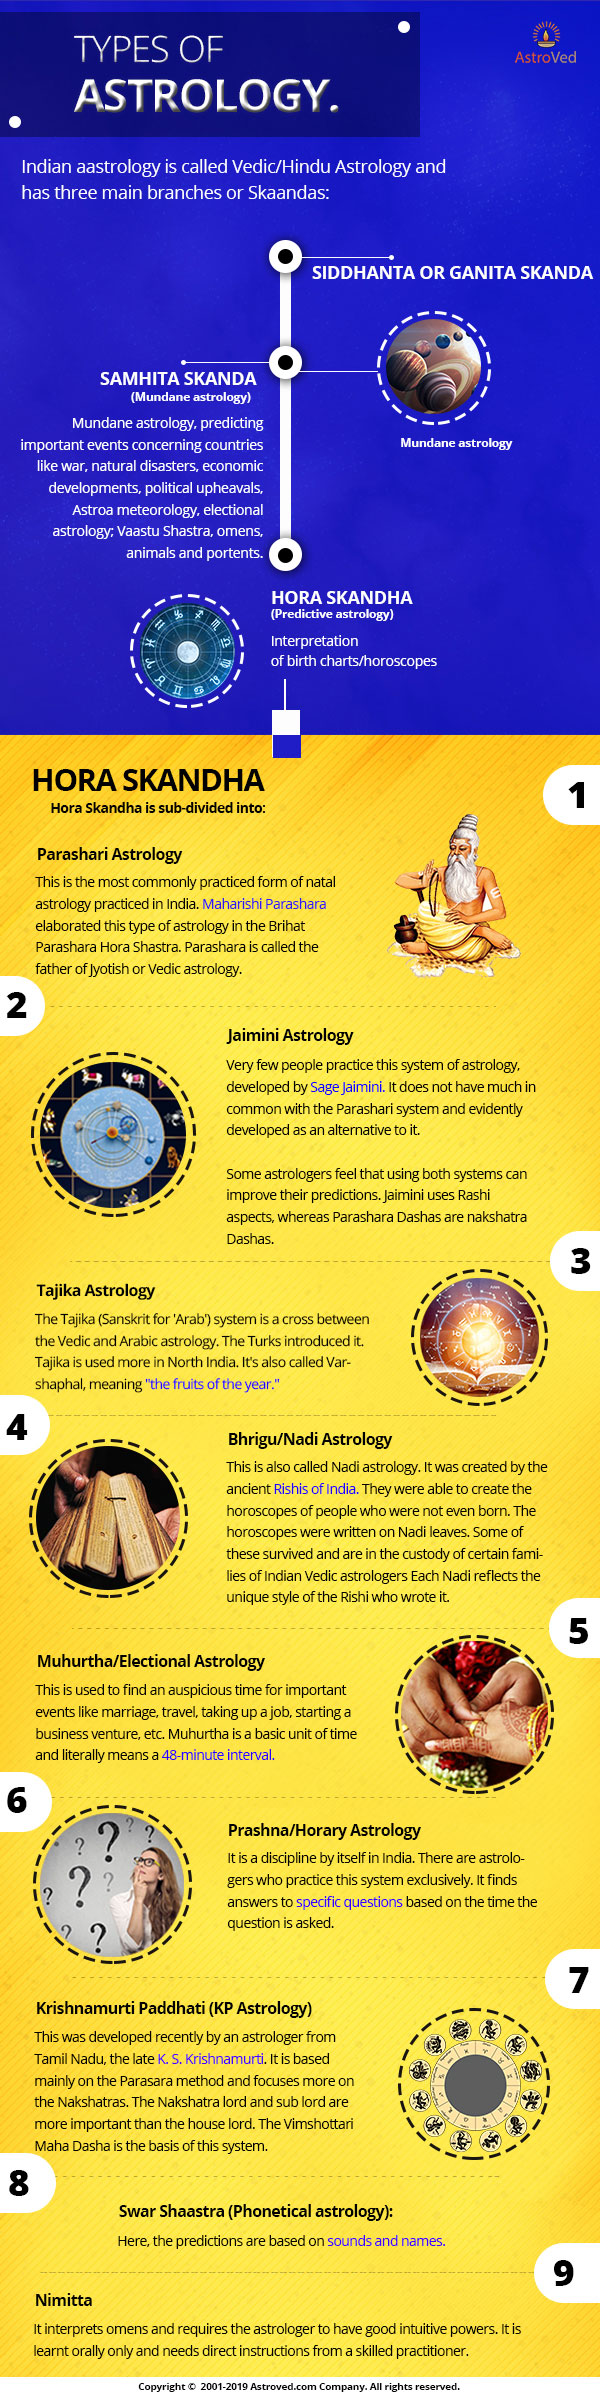 Types Of Astrology